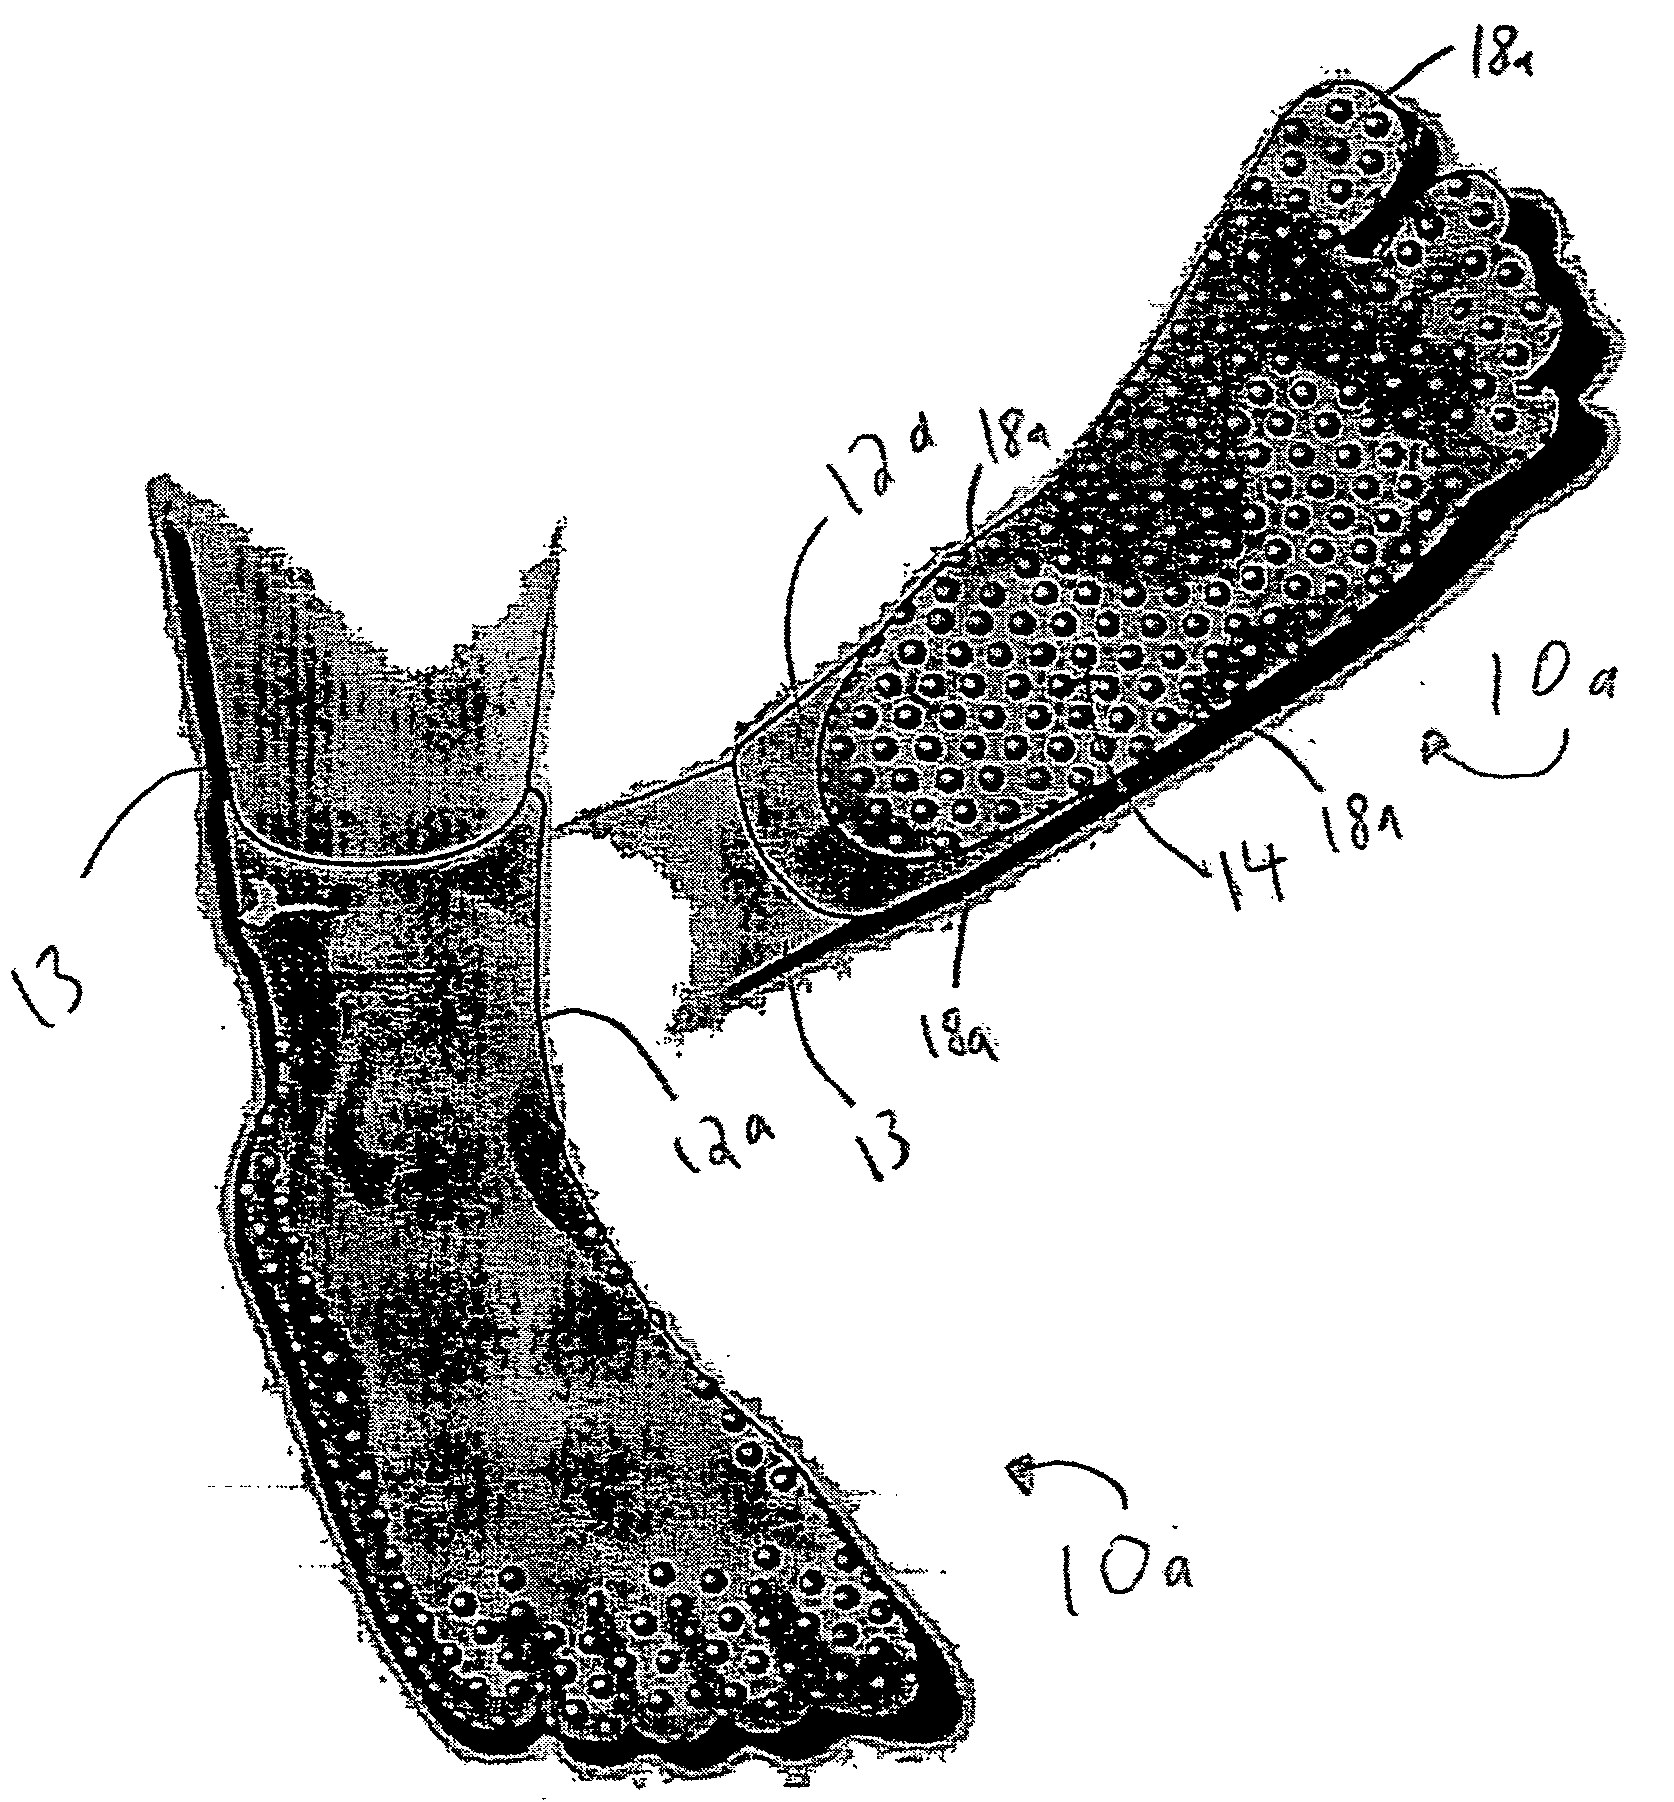 Slip-resistant extremity covering and method therefor